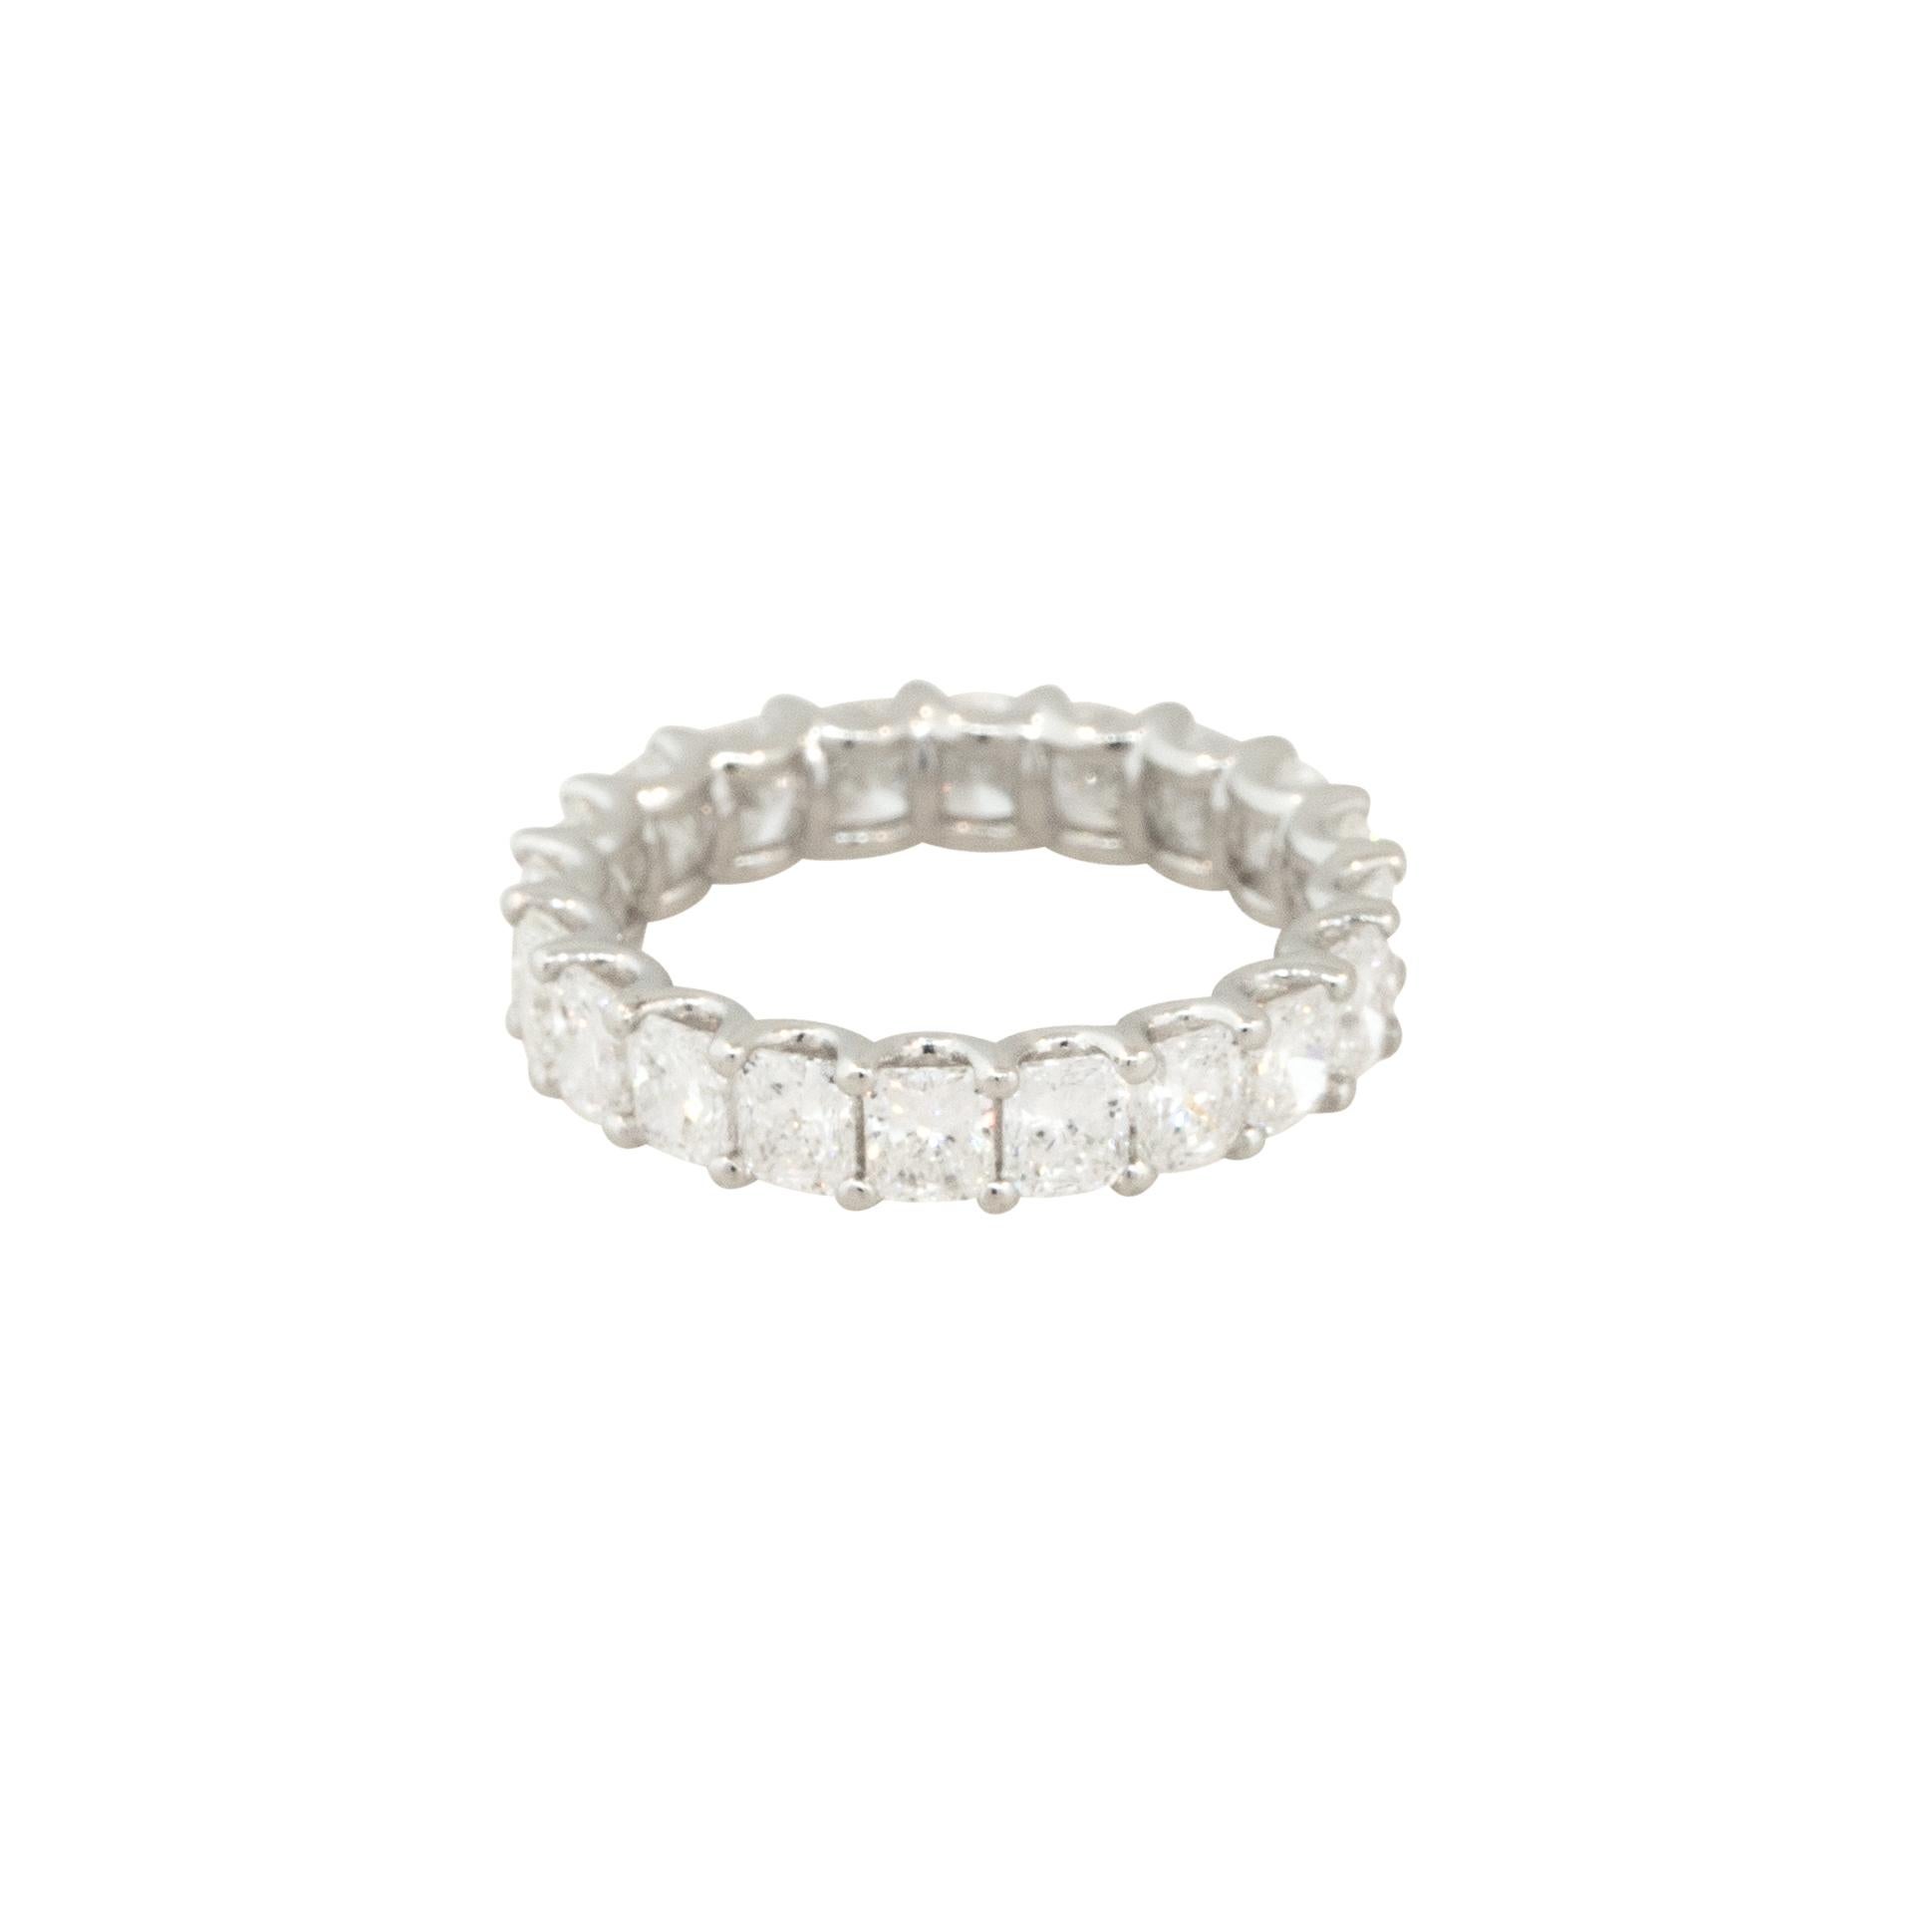 14k White Gold 4.01ctw Radiant Cut Diamond Eternity Band

Style: Women's Diamond Eternity Band
Material: 14k White Gold
Diamond Details: Approximately 4.01ctw of Radiant Cut Diamonds. All Diamonds are prong set and there are 20 Diamonds total.